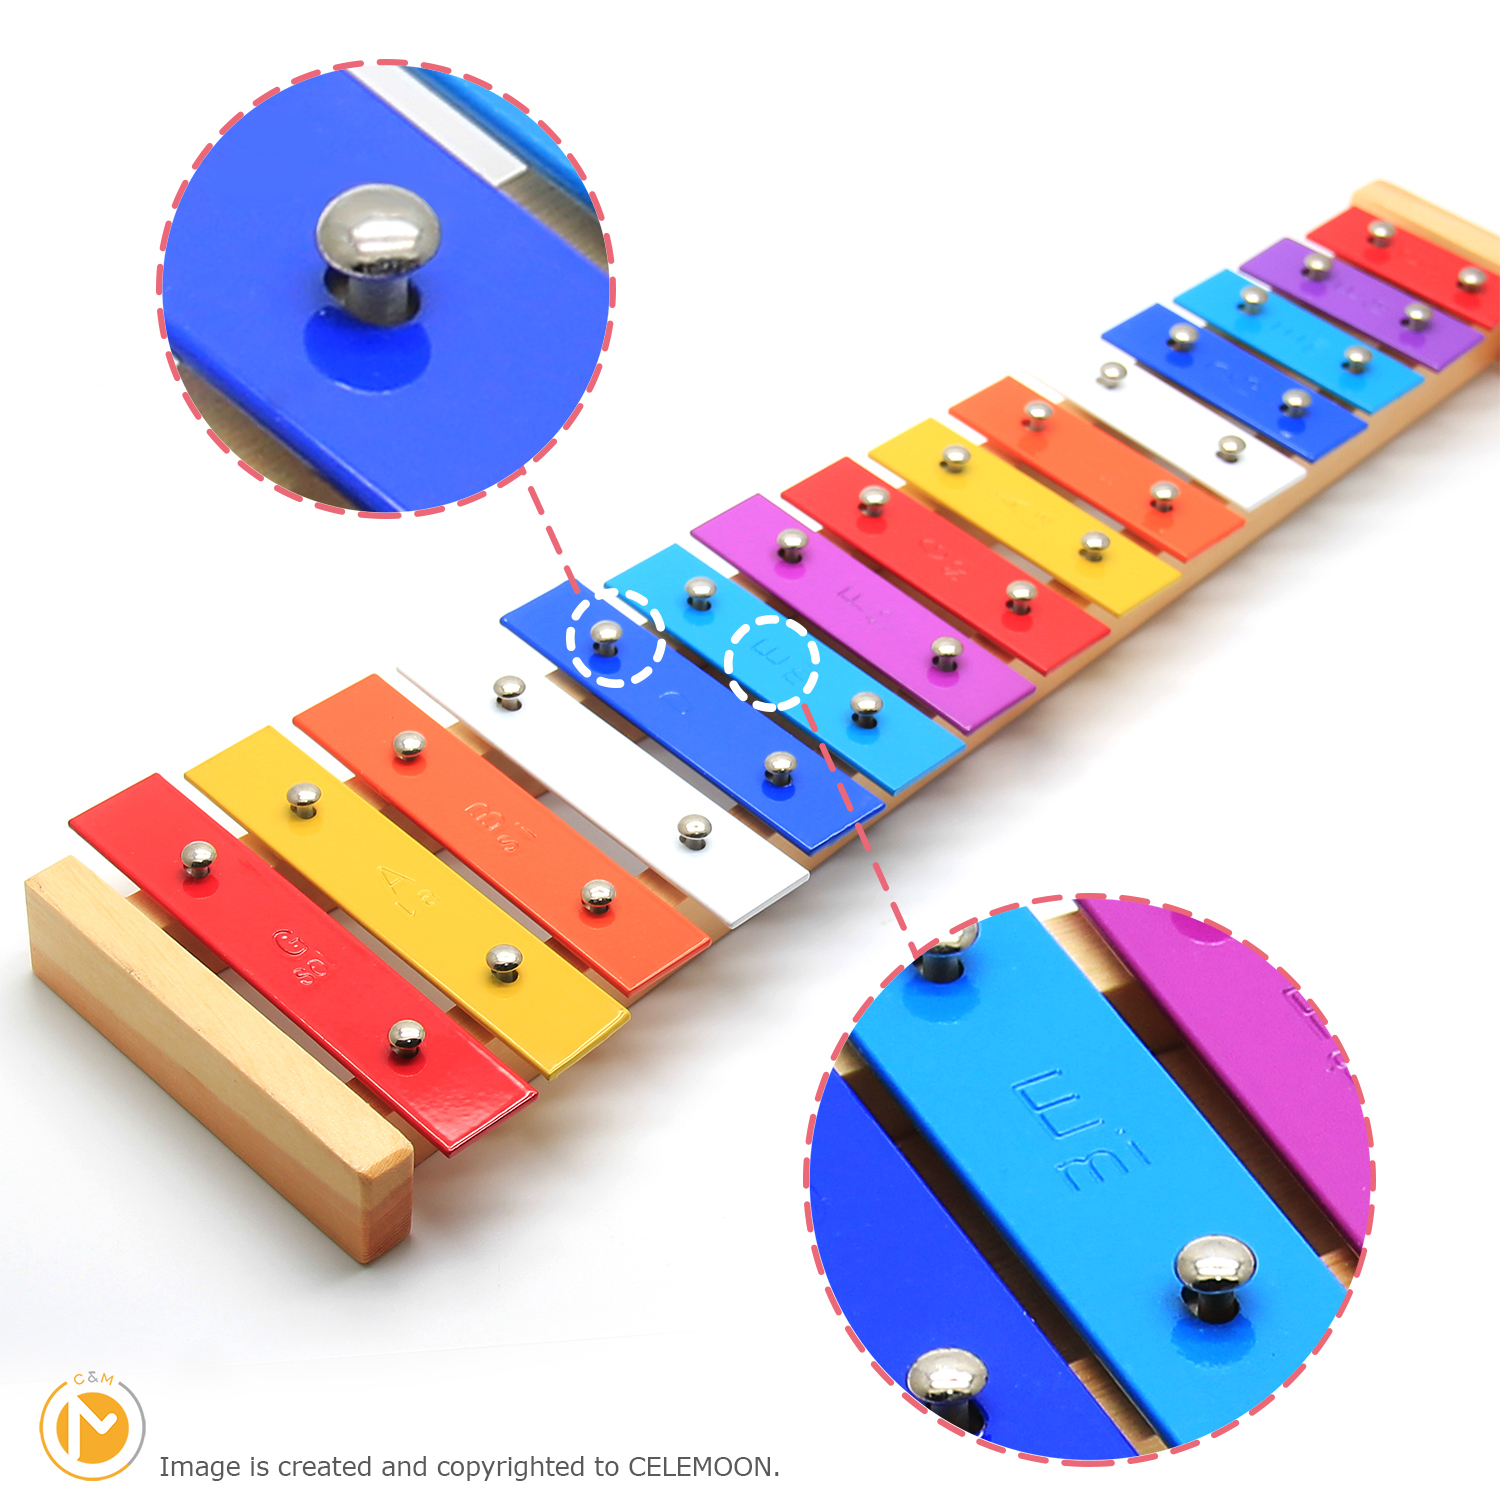 Metal Wooden Xylophone Knock Piano 15-Tone For Children Educational Preschool Learning Non-Toxic